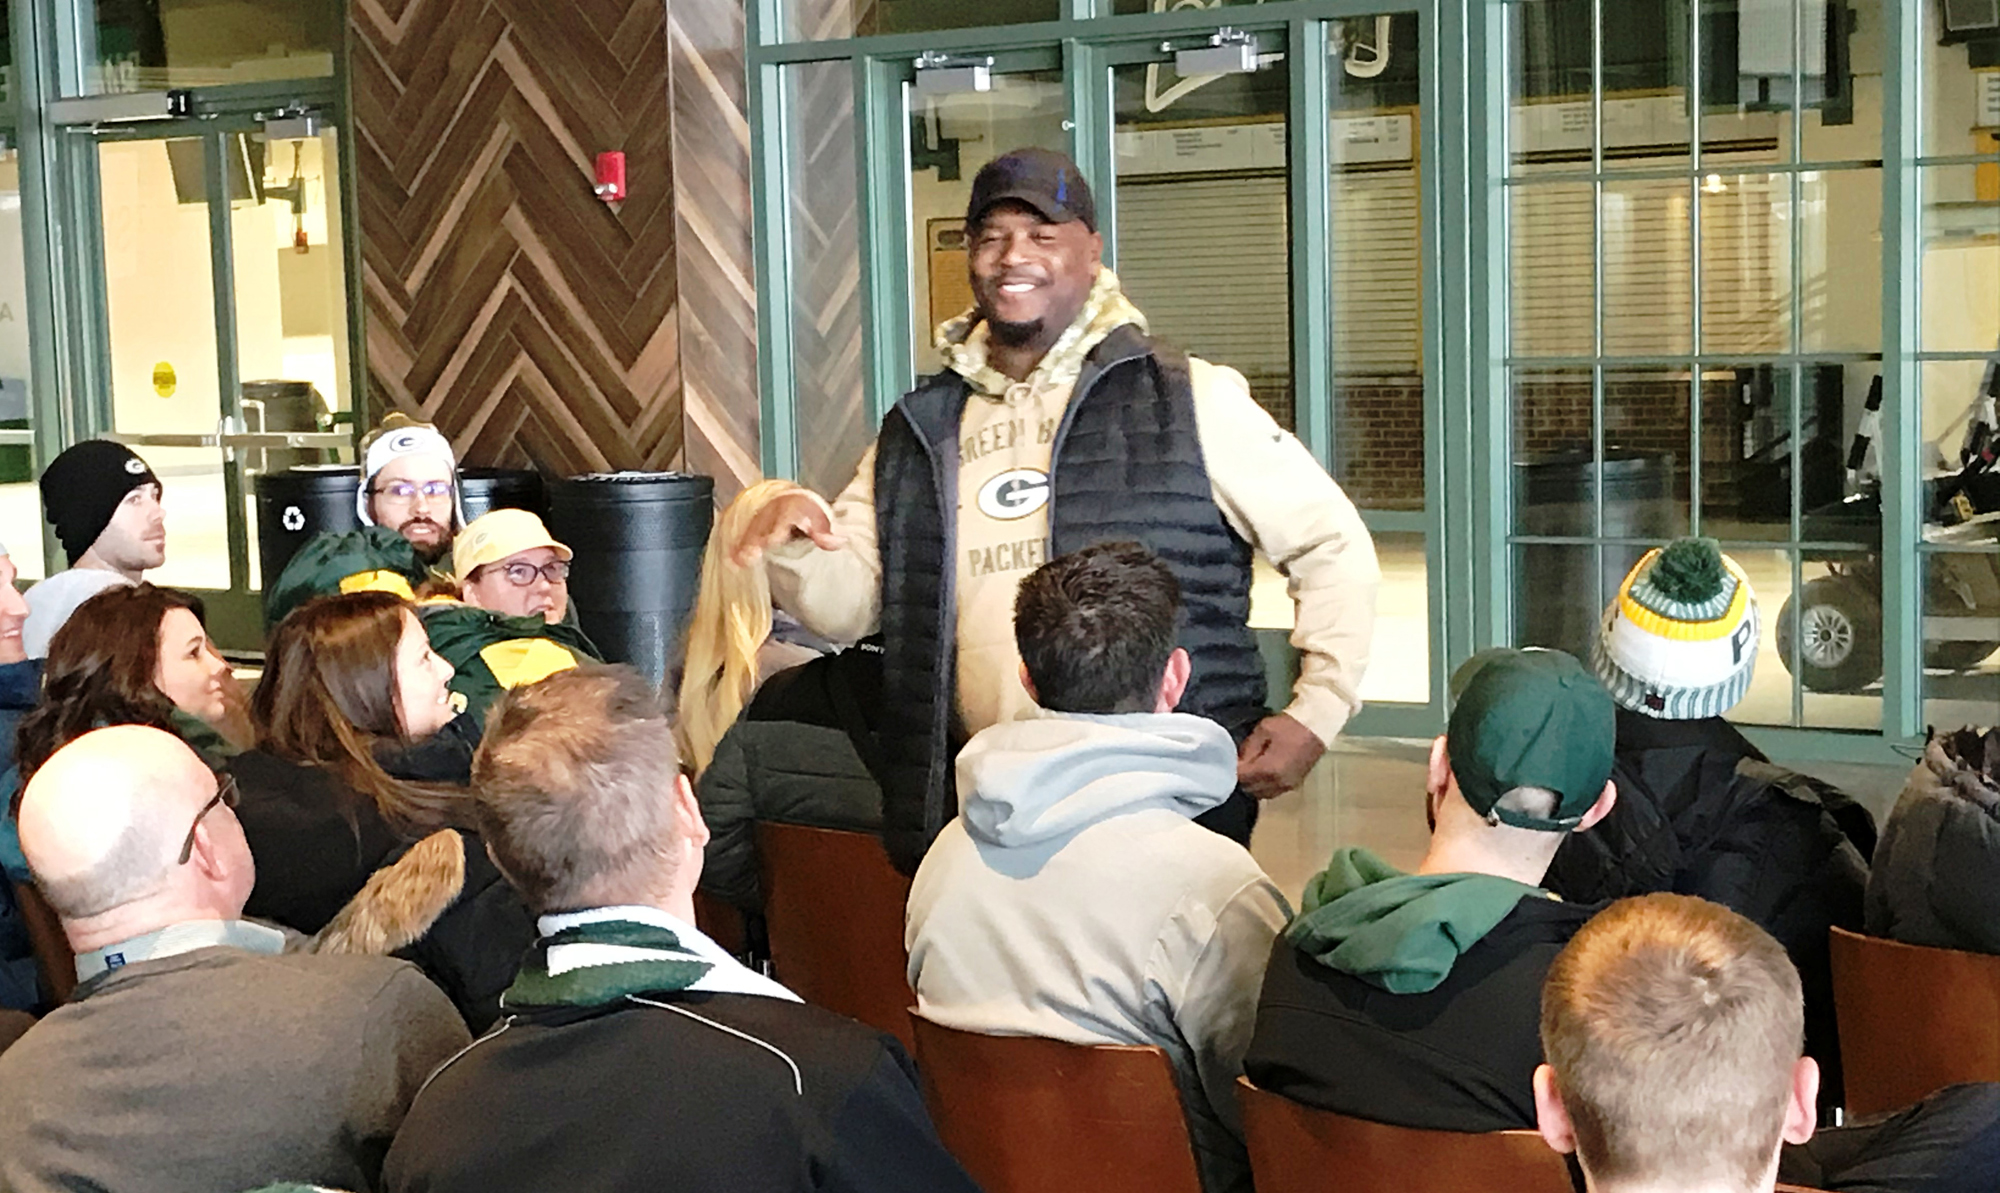 Packers alumni give stadium tours ahead of playoff game - The Press